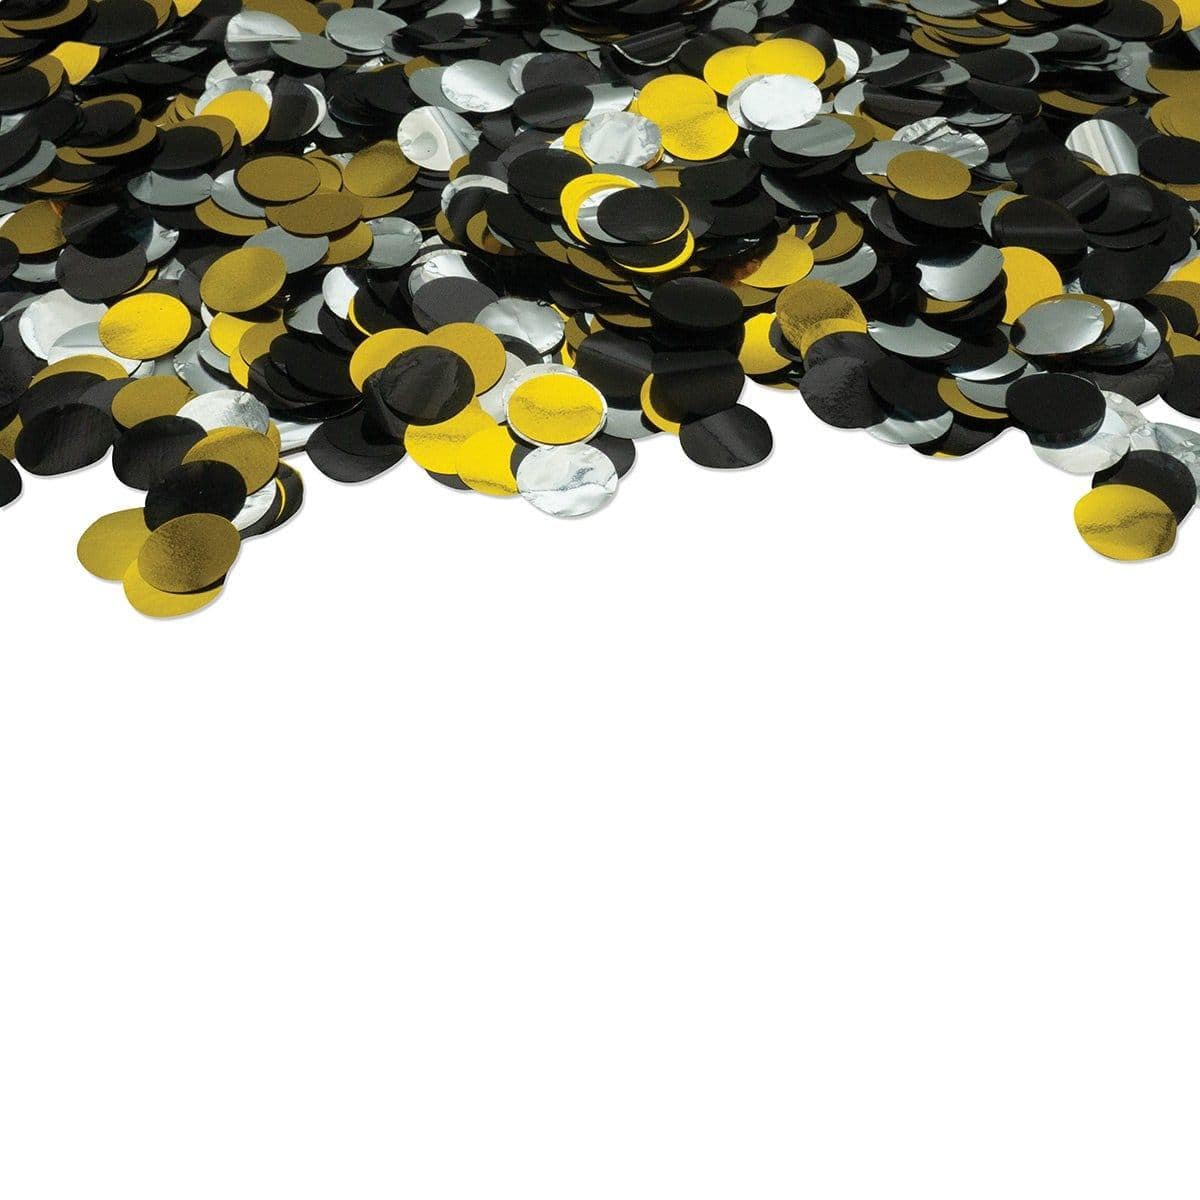 Buy Balloons Black, Gold and Silver Metallic Round Confetti, 1 Ounce sold at Party Expert